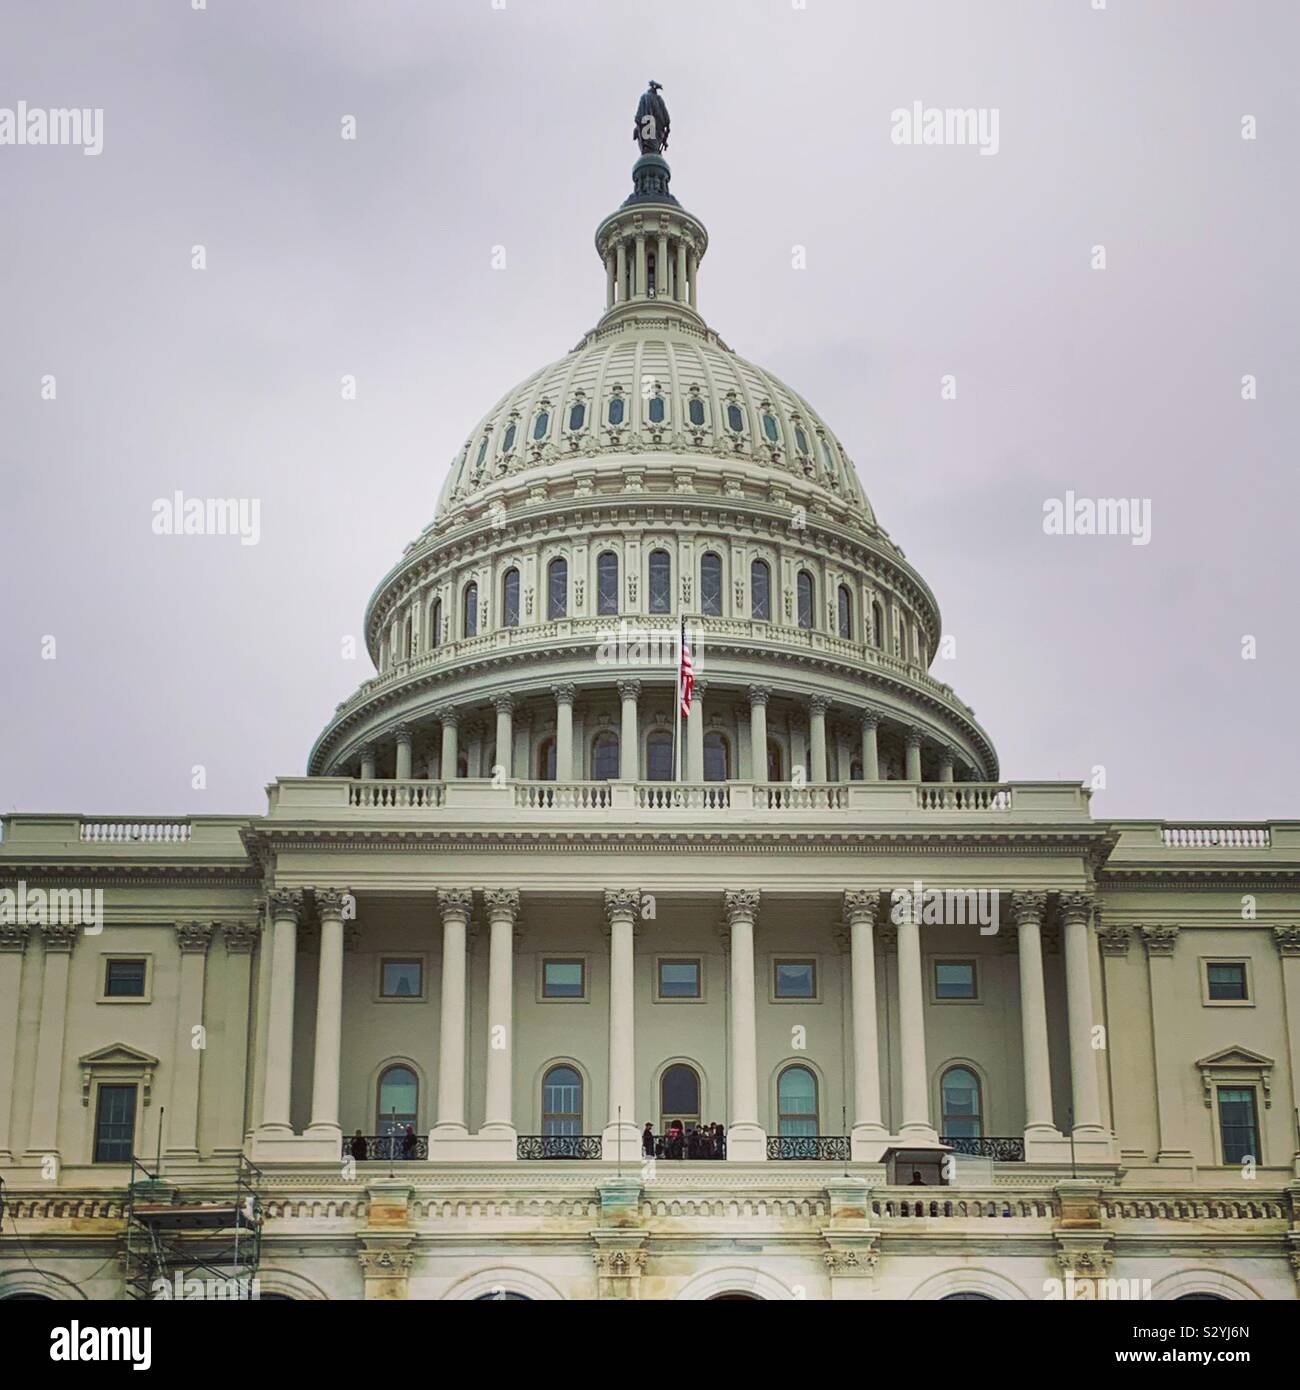 Top of the United States Capitol building in Washington D.C. which houses the US senate and House of Representatives Stock Photo